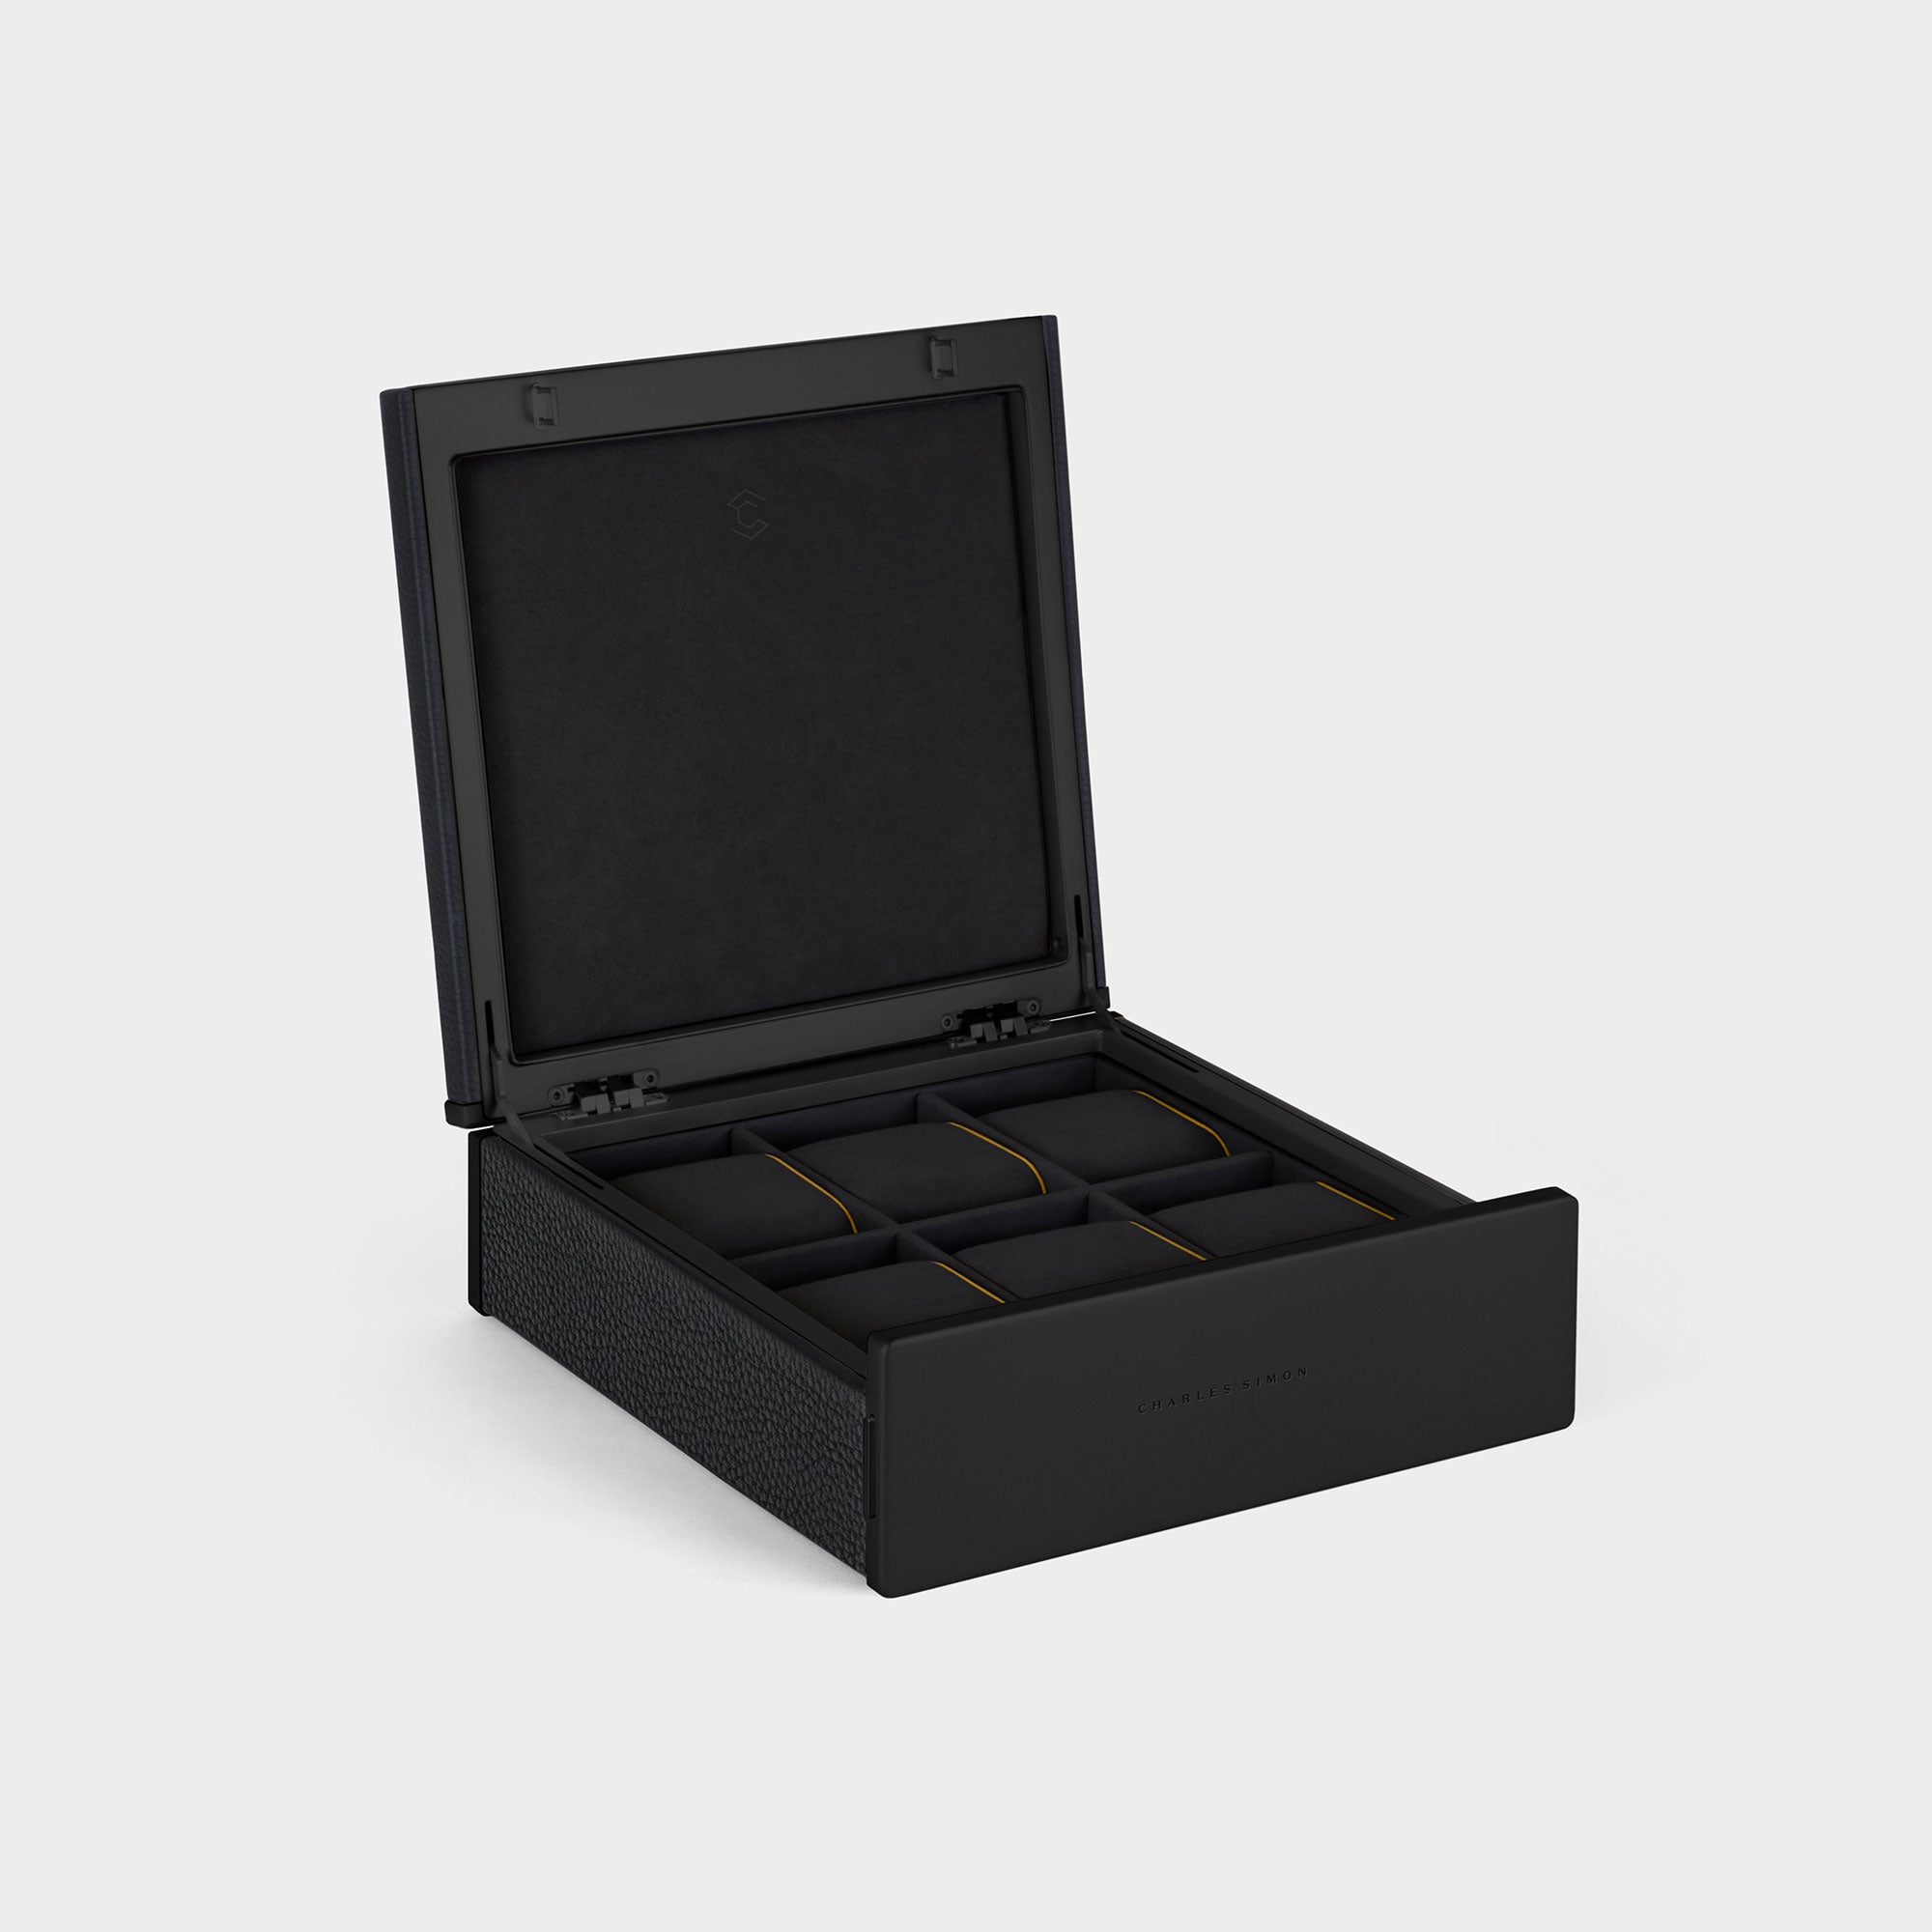 Handmade watch box for 6 watches in black leather, black carbon fiber and anodized aluminum casing and Notte Alcantara interior with Notte watch cushions with sunflower leather sides